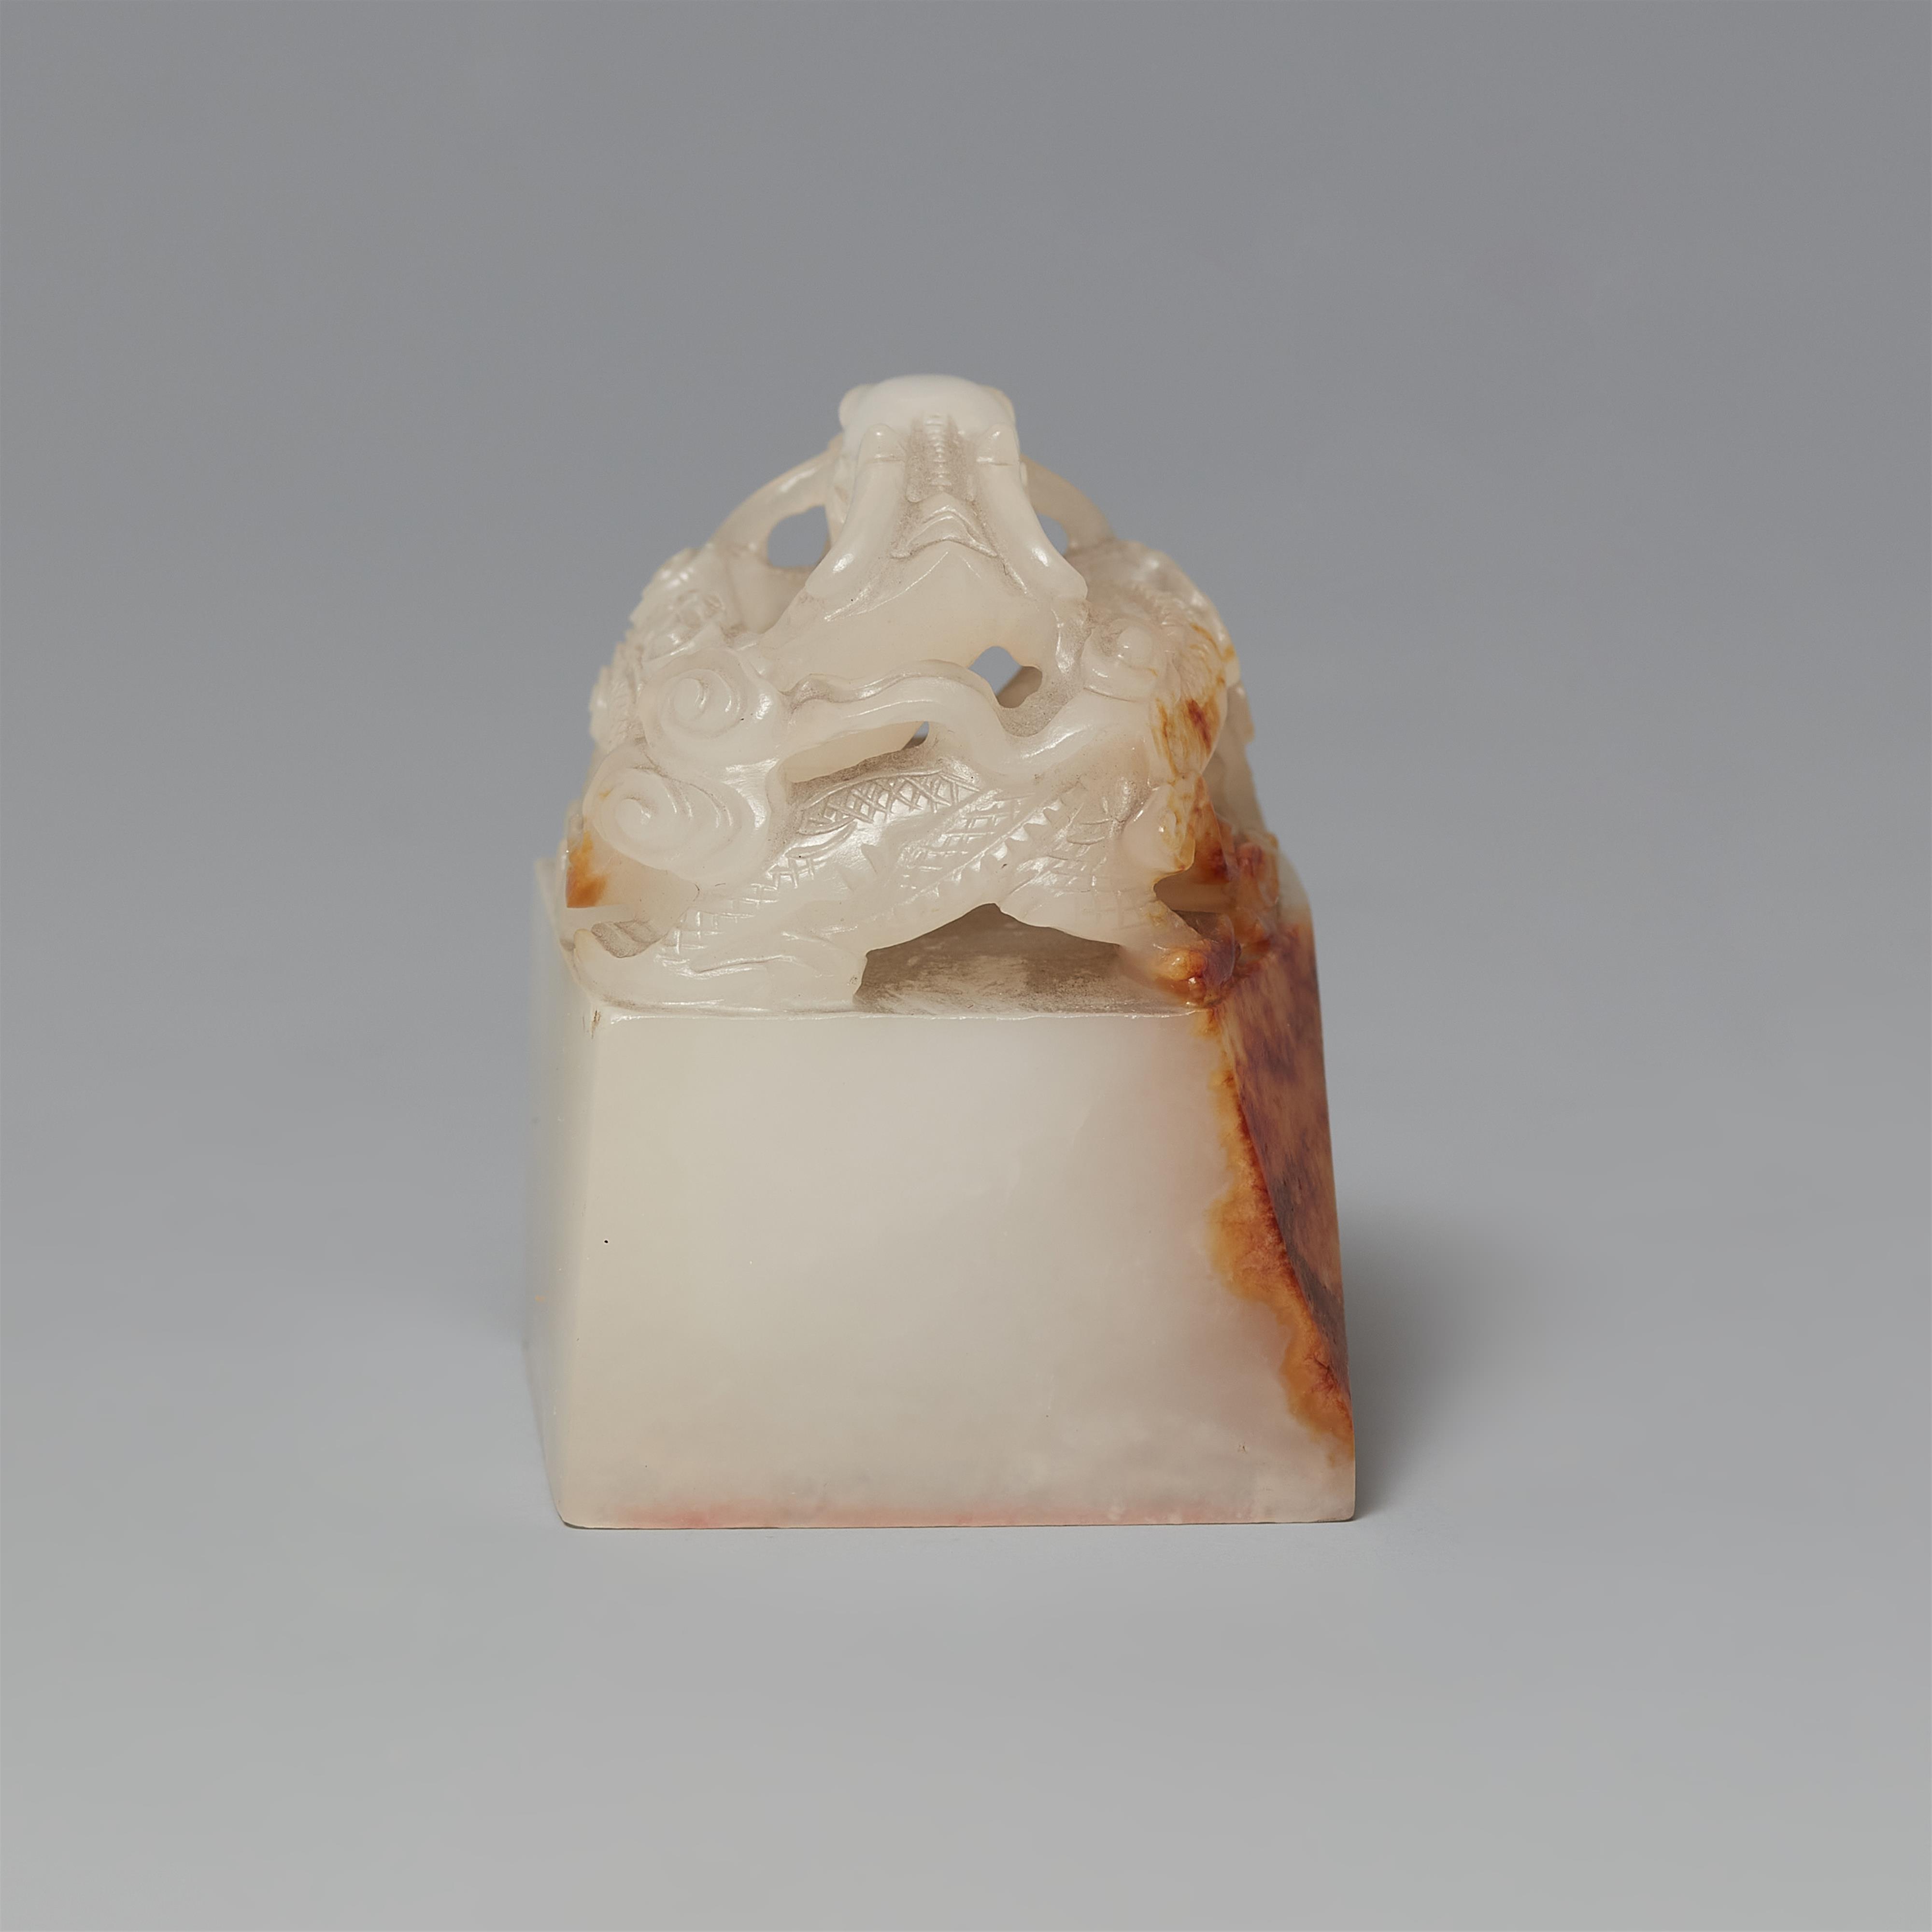 An extremely important pair of Imperial jade seals, "Guxi tianzi" and "Youri zizi". Qianlong period, around 1780-1789 - image-7